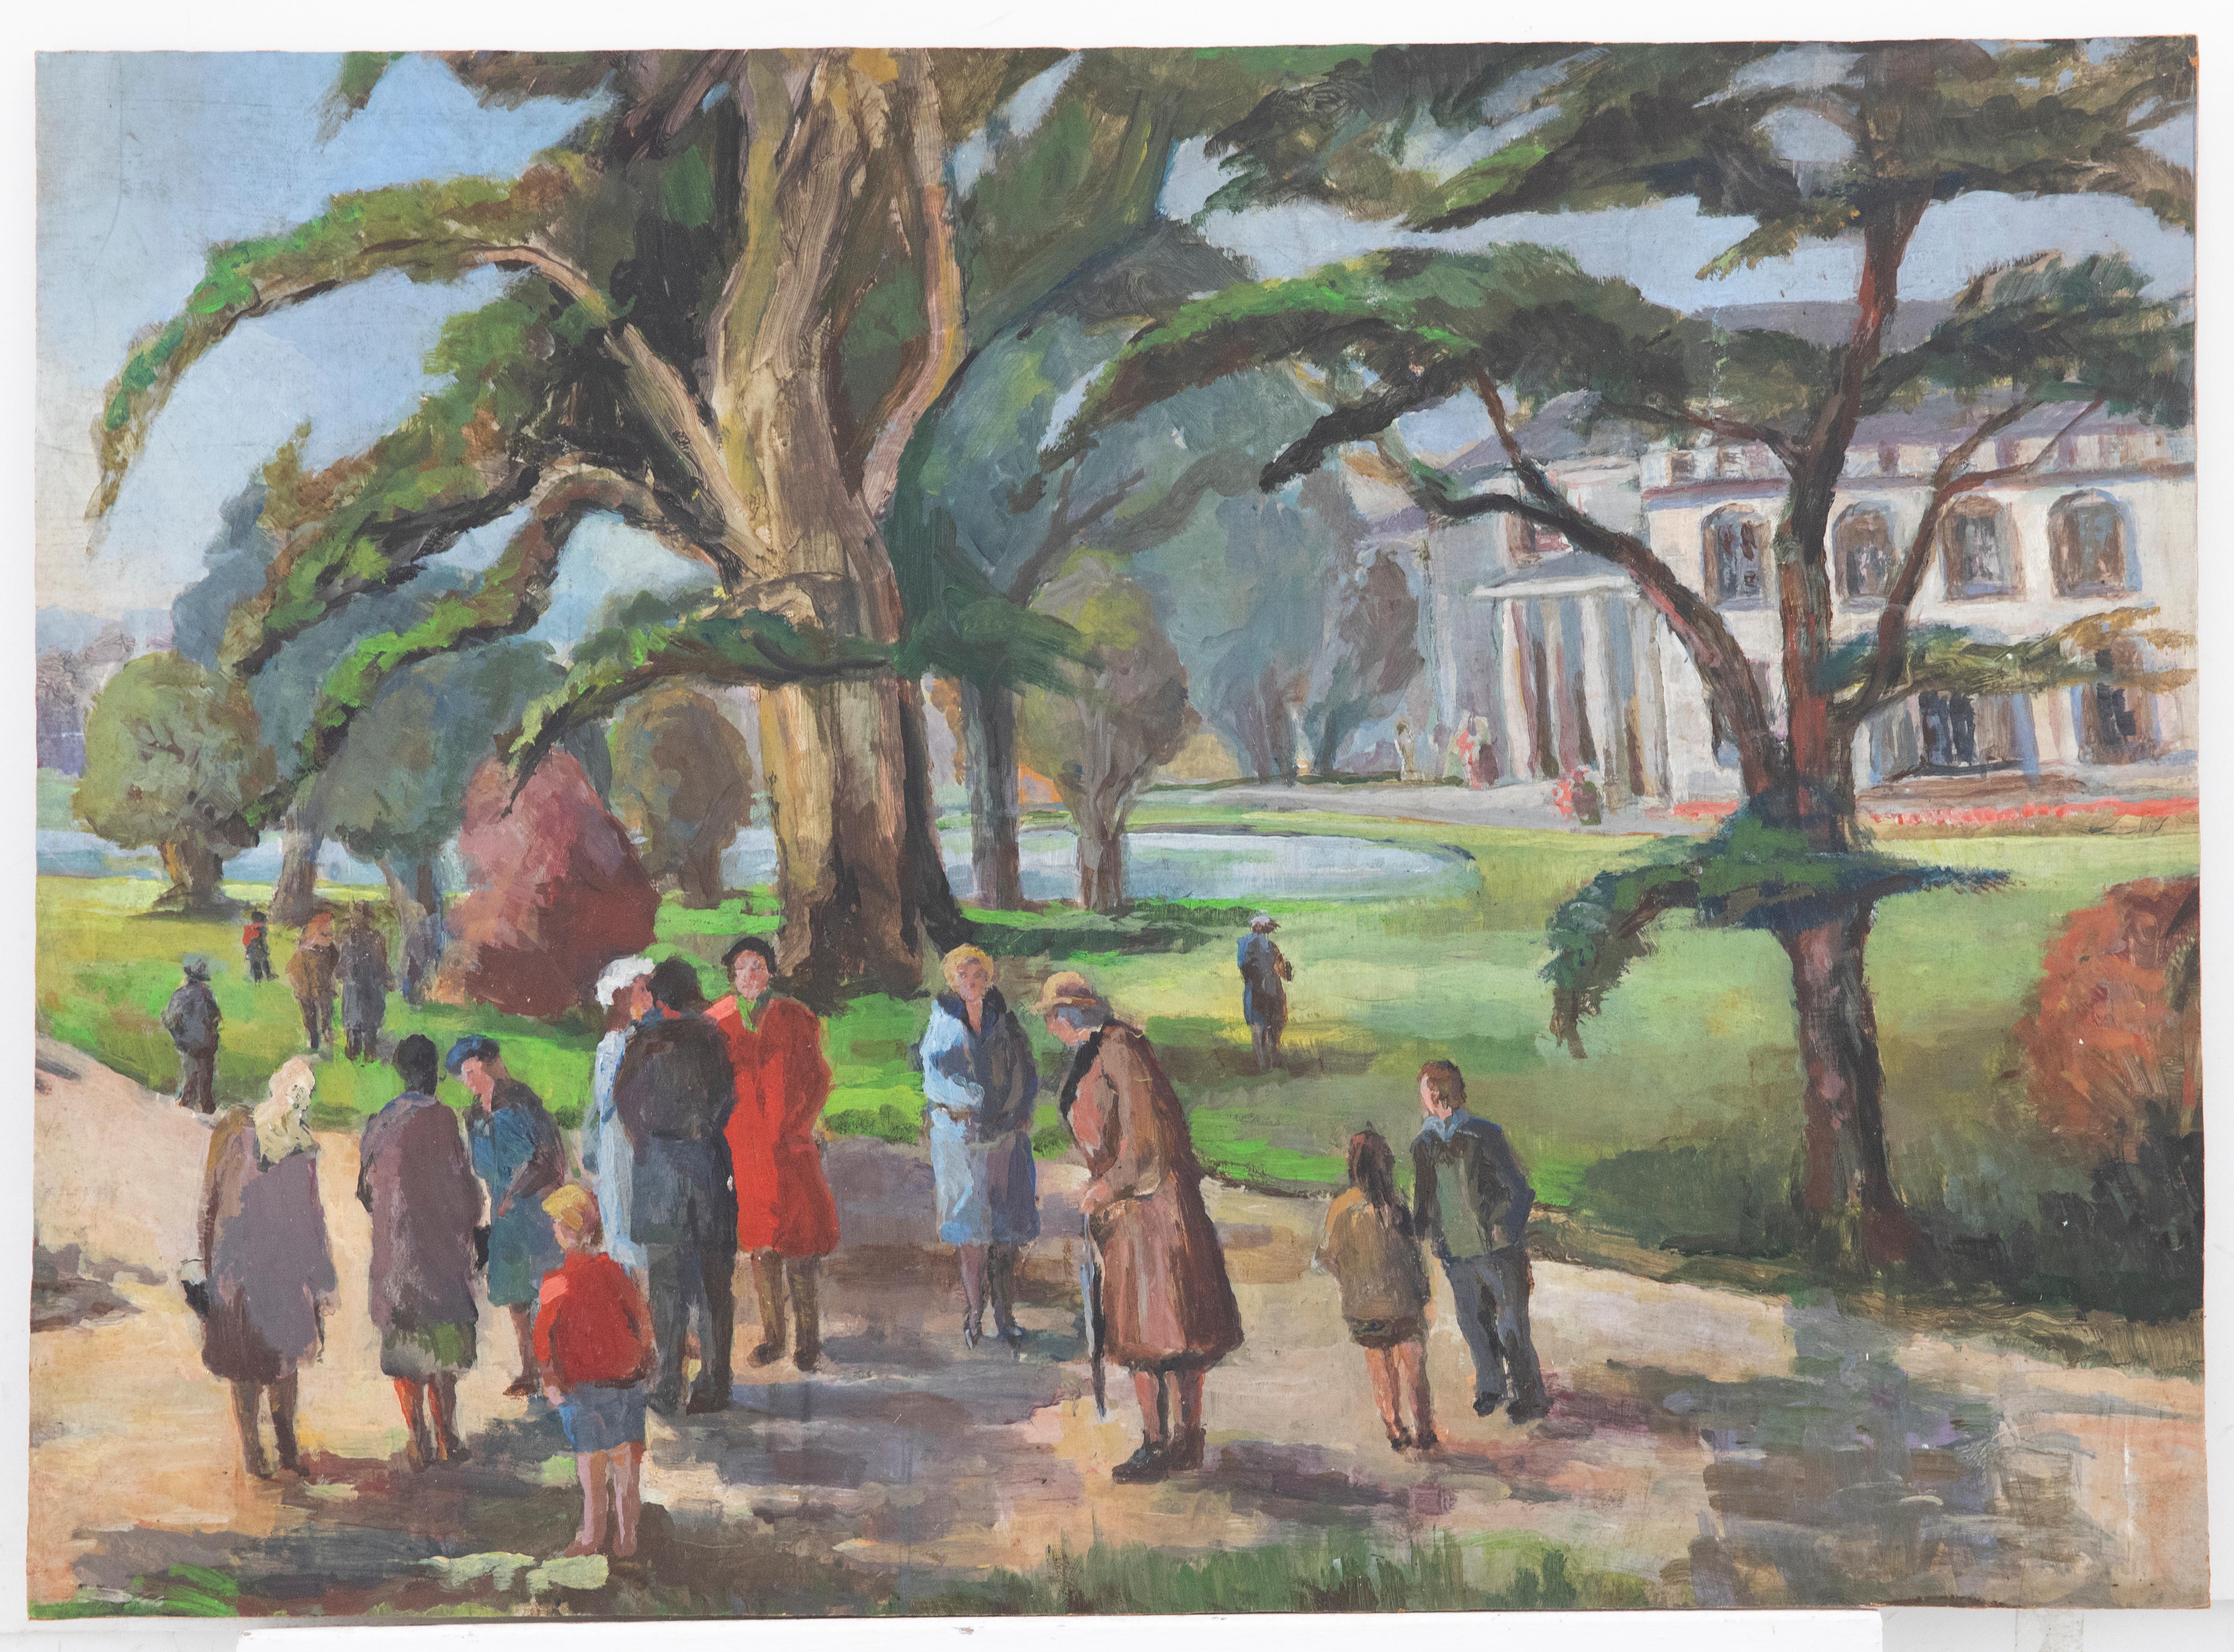 Mid 20th Century Oil - Gathering in the Park - Painting by Unknown